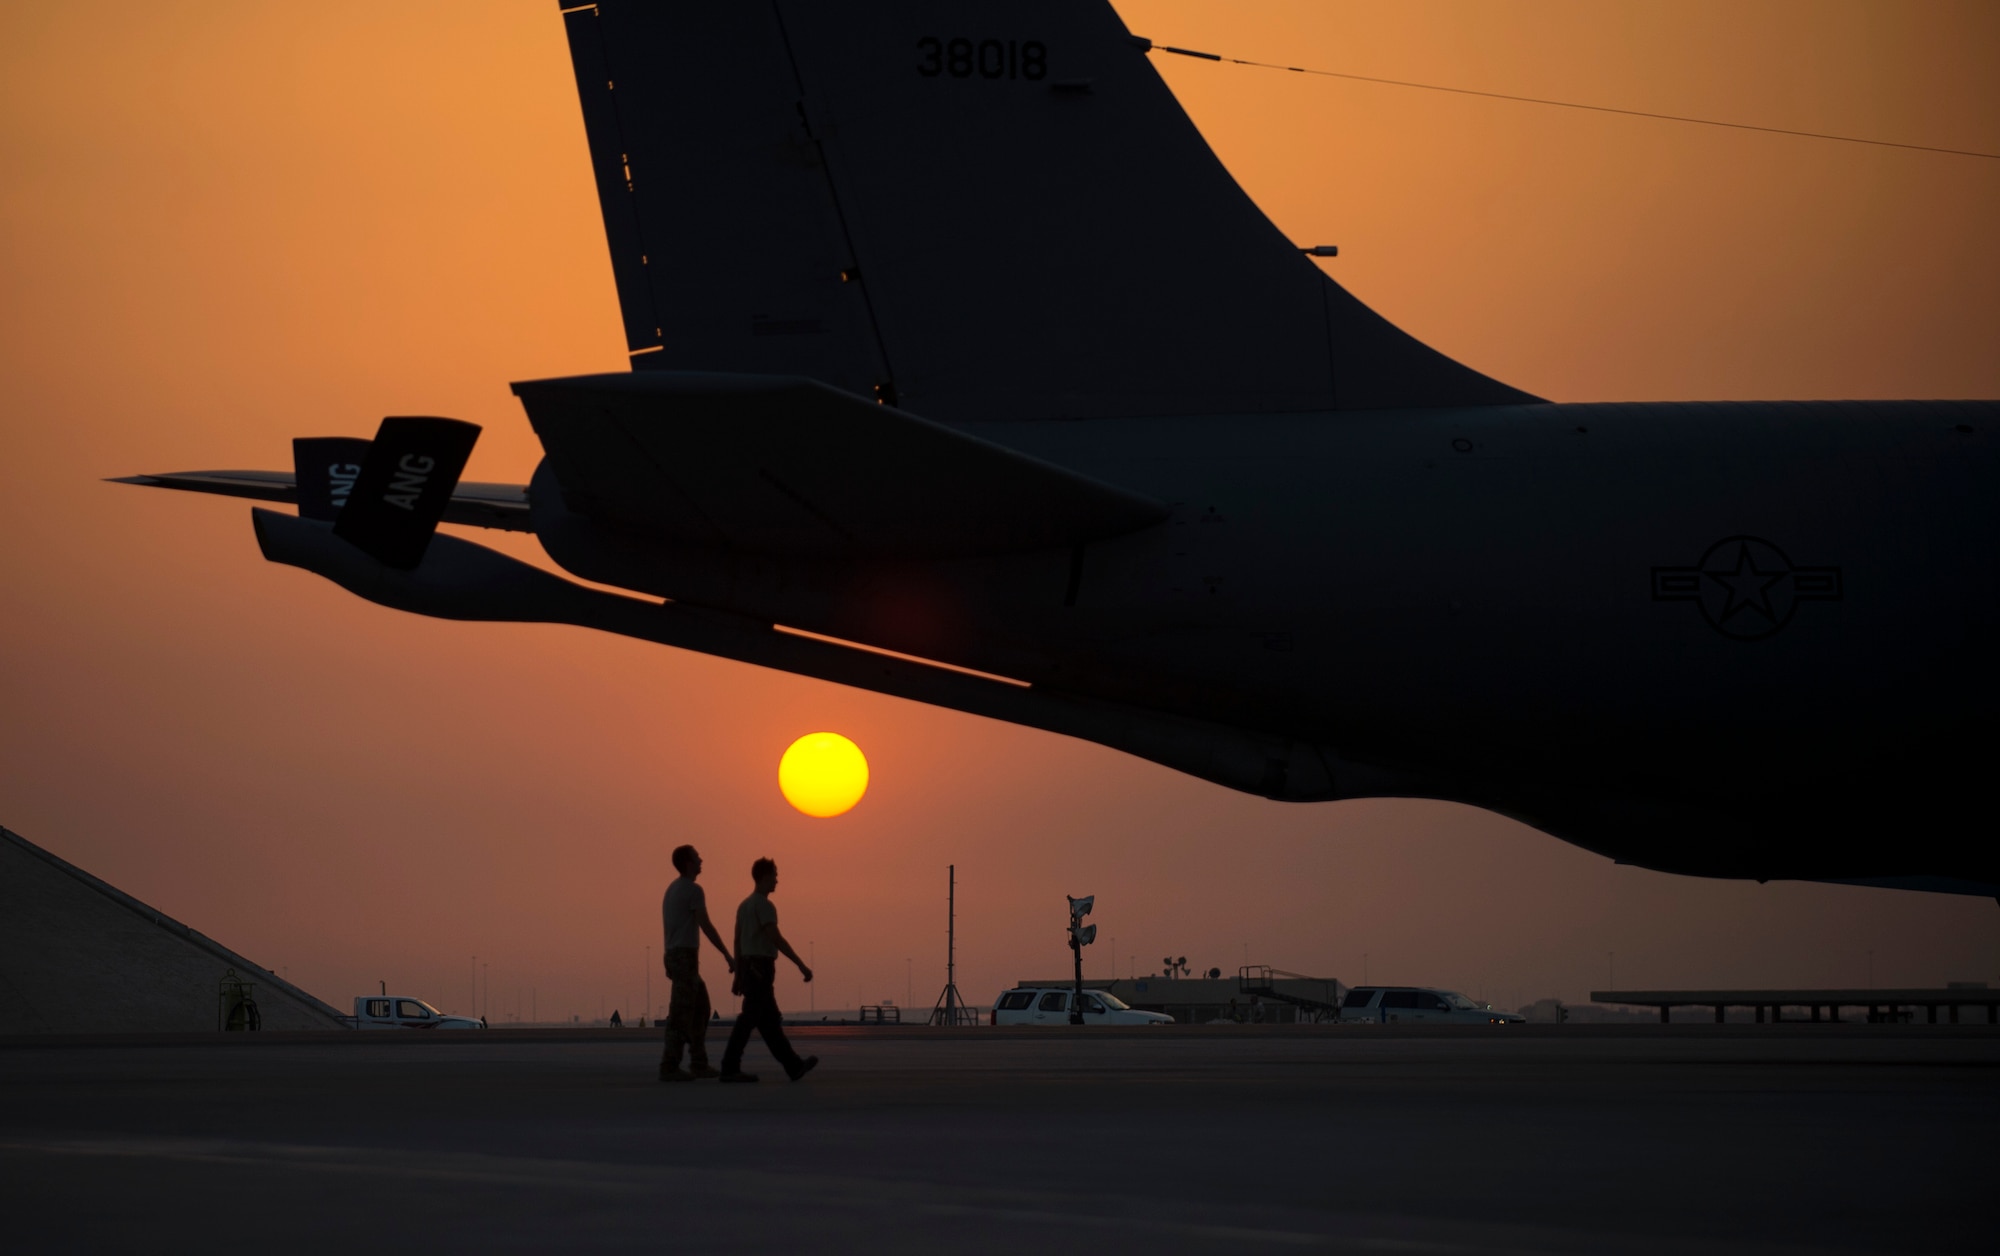 U.S. Air Force Airmen with the 379th Expeditionary Aircraft Maintenance Squadron prepare to conduct a pre-flight check on a KC-135 Stratotanker at Al Udeid Air Base, Qatar, June 8, 2017. The inspection being performed on one of the KC-135 Stratotanker is accomplished on a regular schedule in order keep the aircraft mission ready. (U.S. Air Force photo by Tech. Sgt. Amy M. Lovgren)